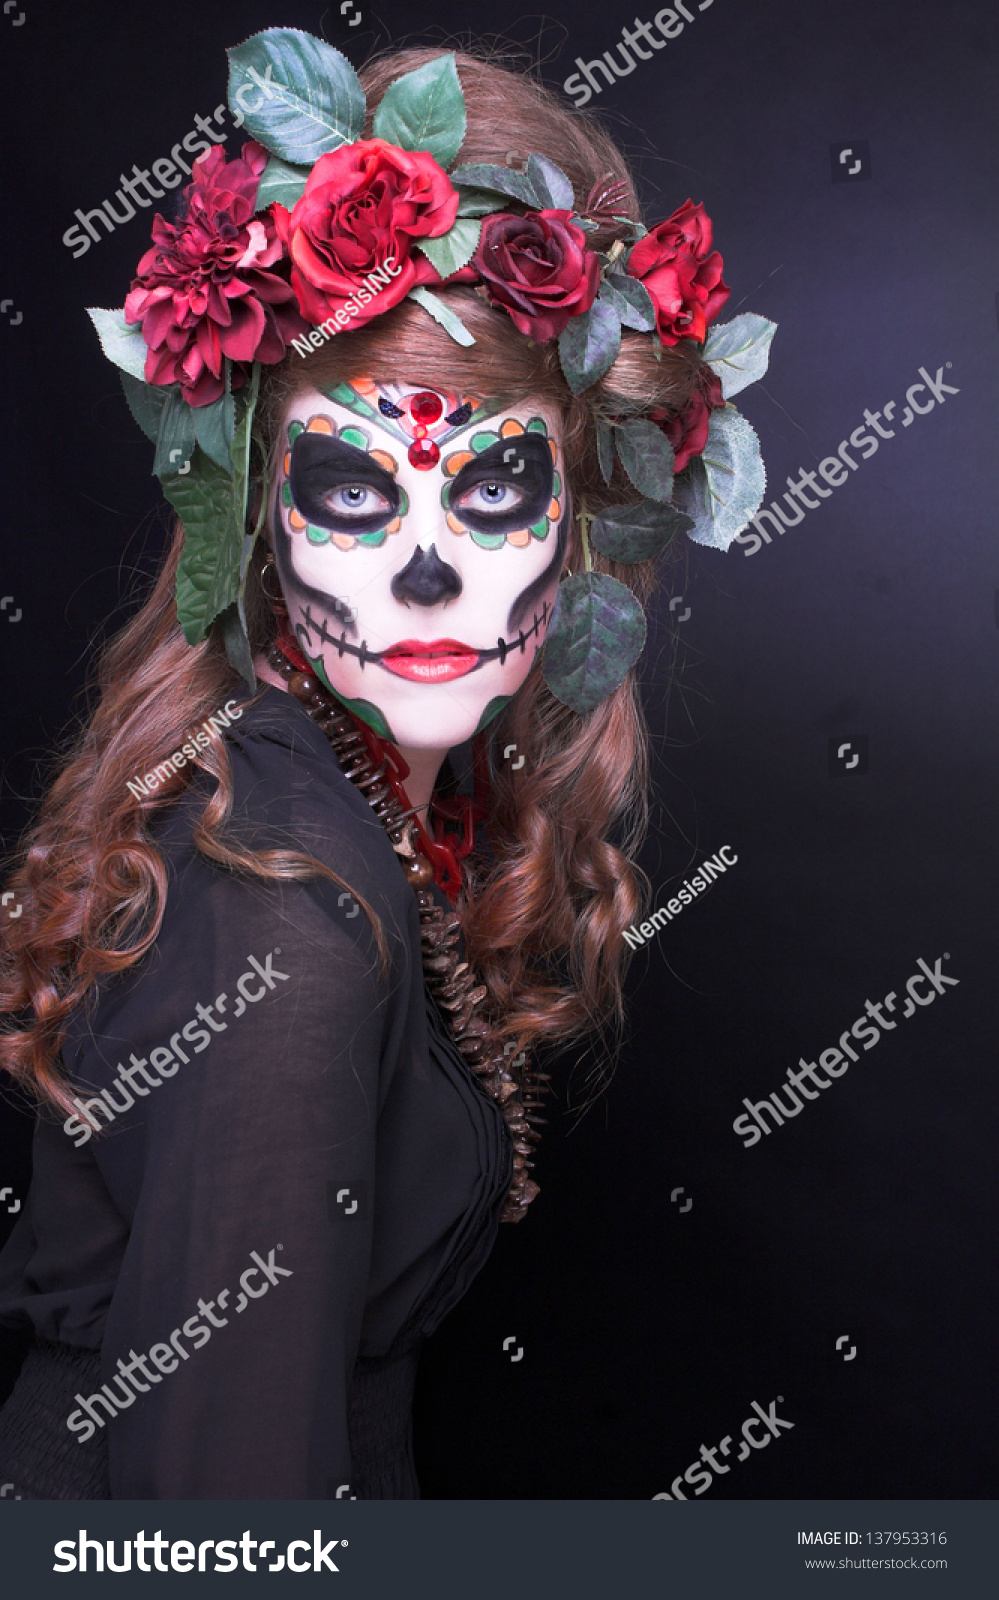 Santa Muerte. Young Woman With Artistic Visage And With Roses In Her ...